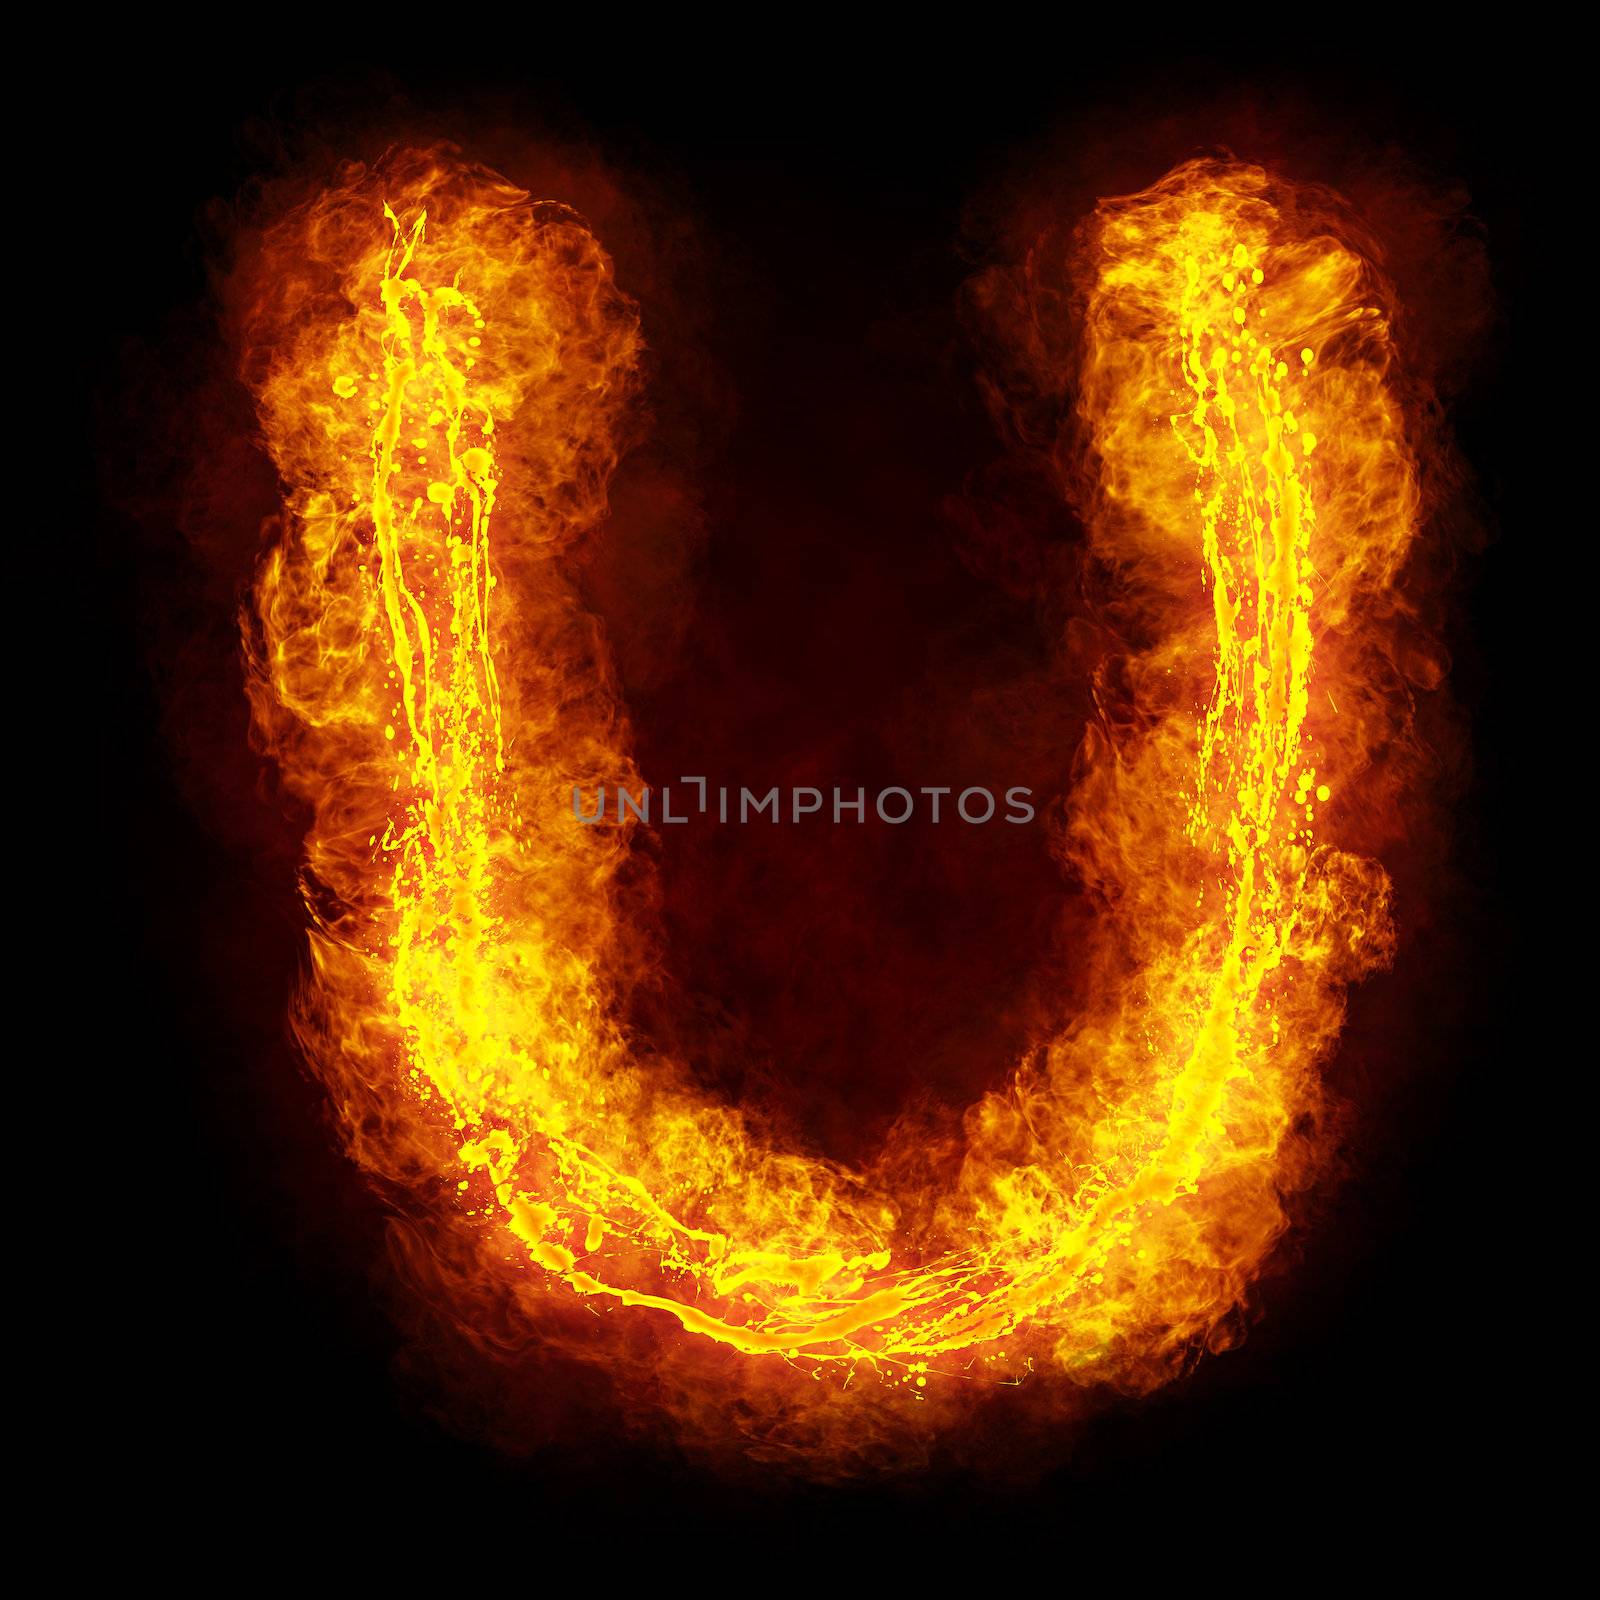 Fiery Font. Bright flamy font symbol. For writing words use Screen blending mode